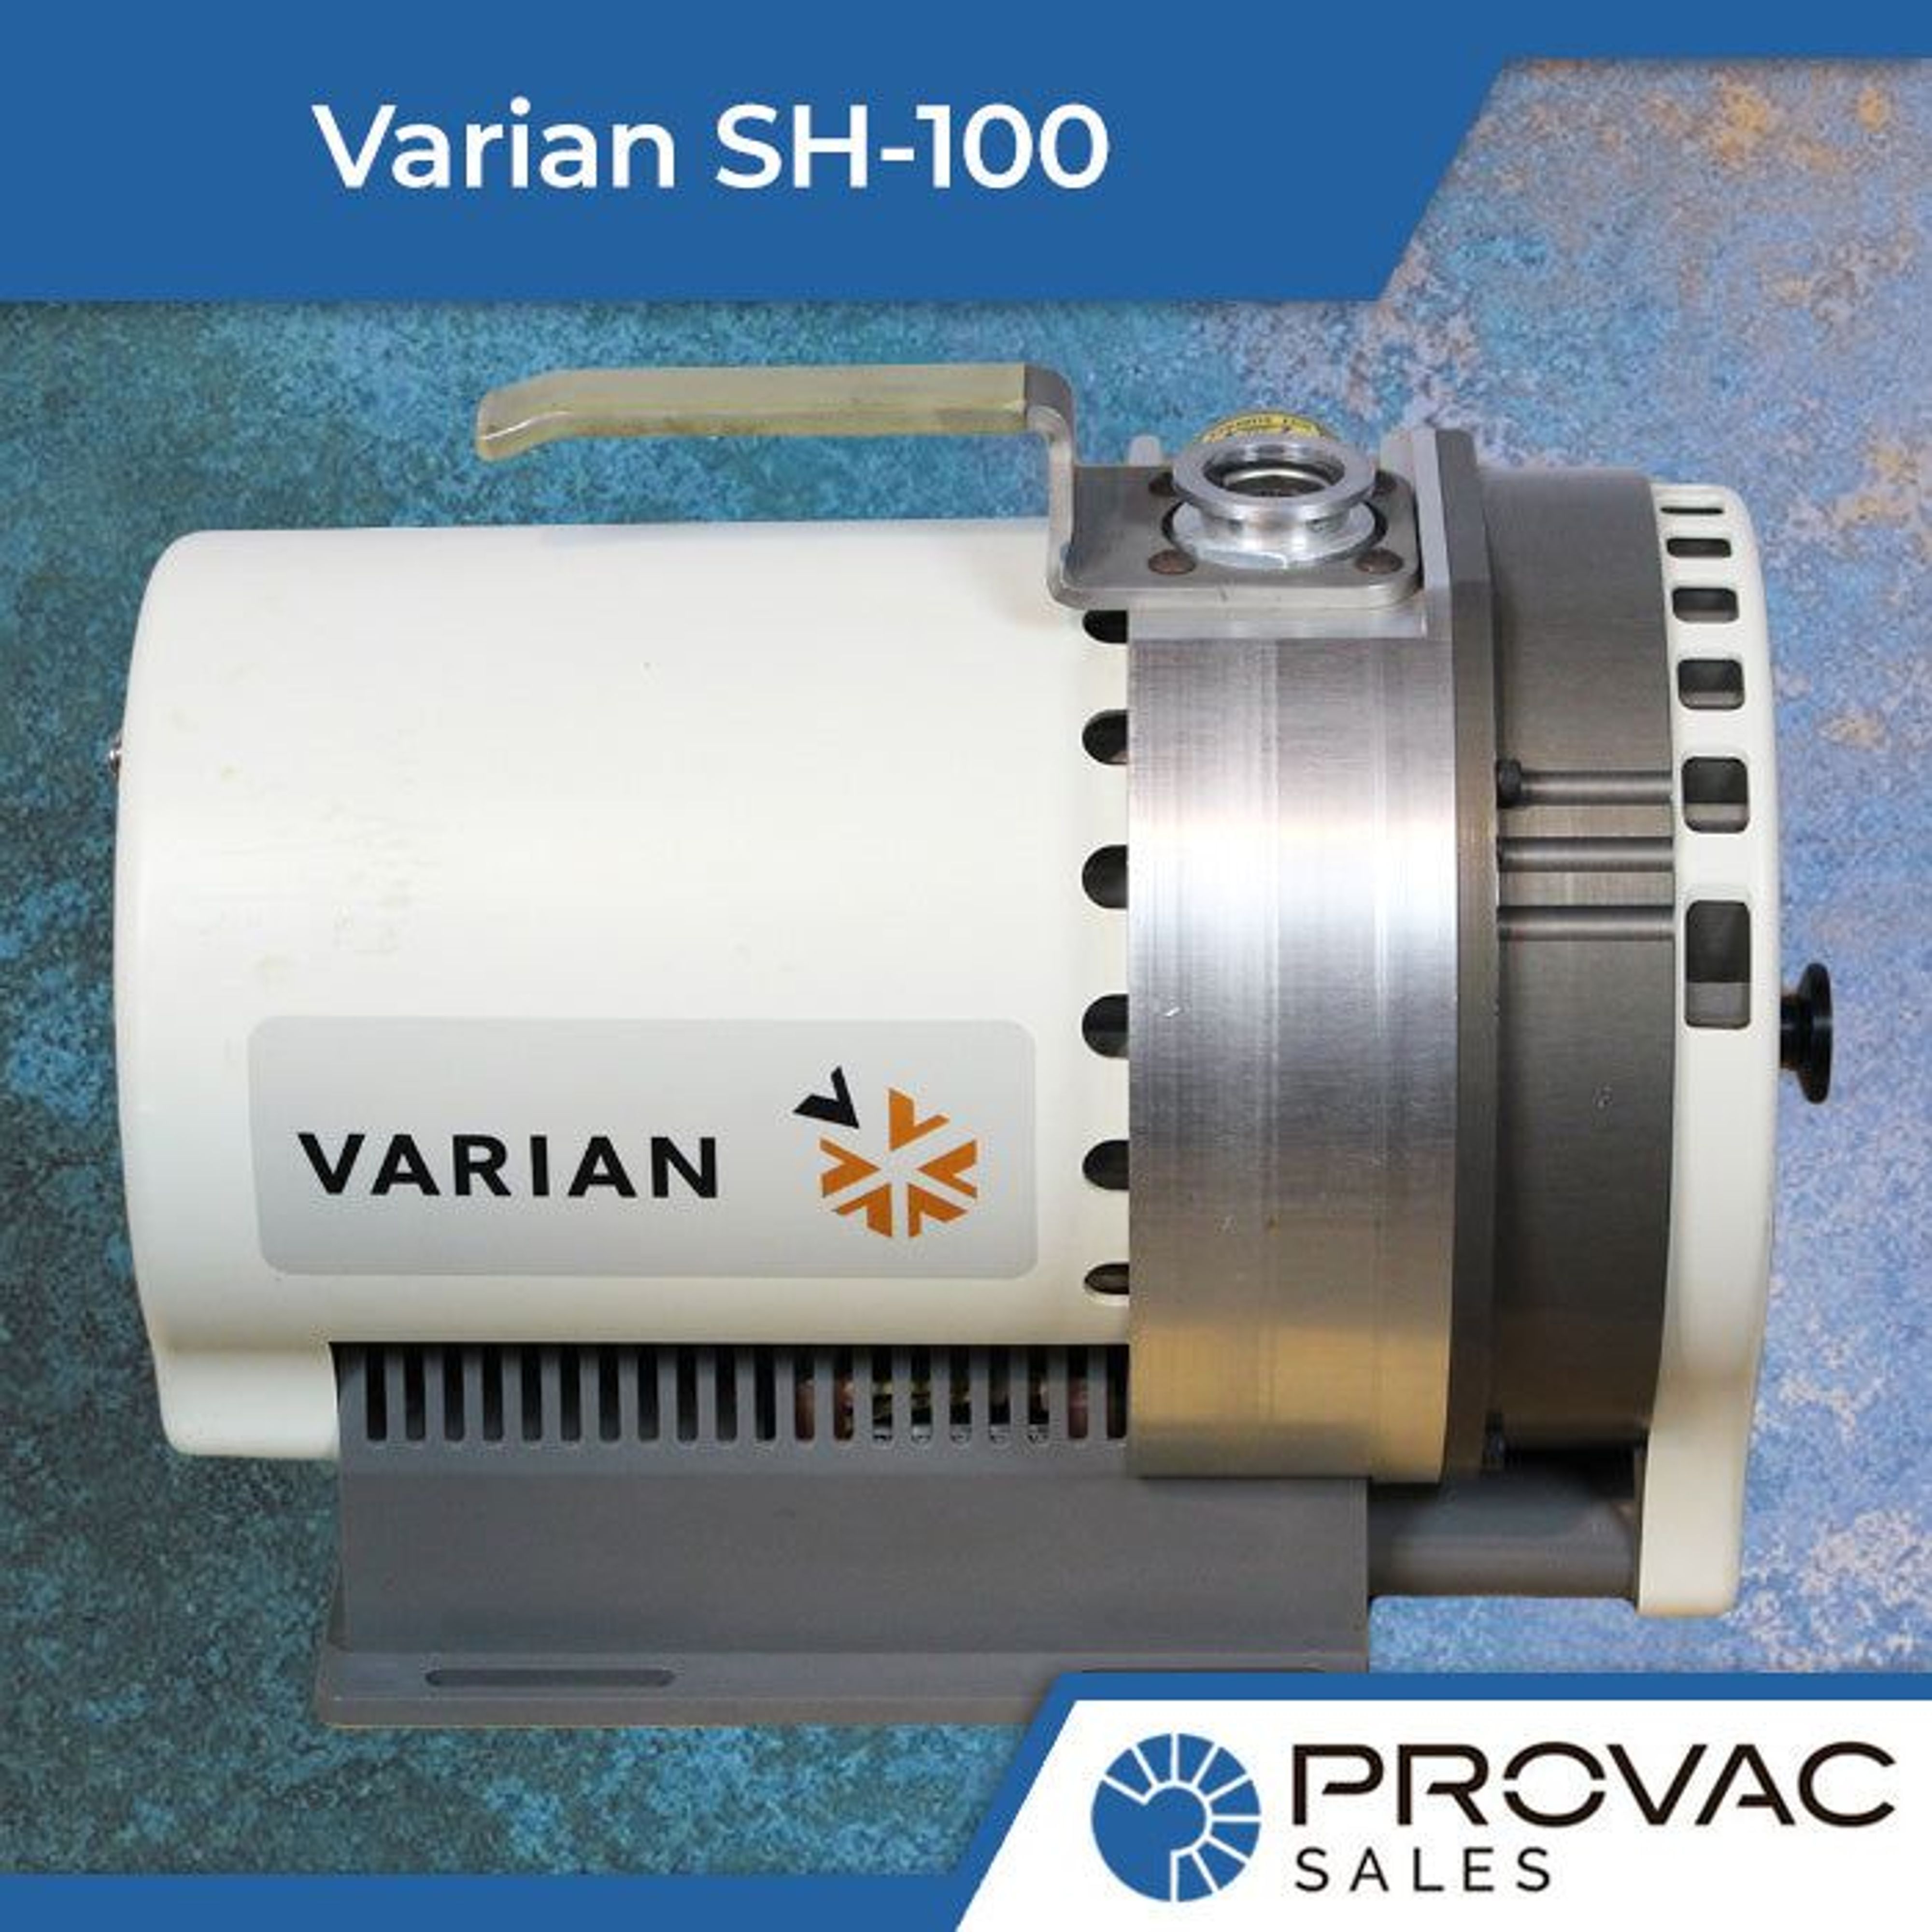 Varian SH-100 Scroll Pump: In Stock, Ready To Ship Background